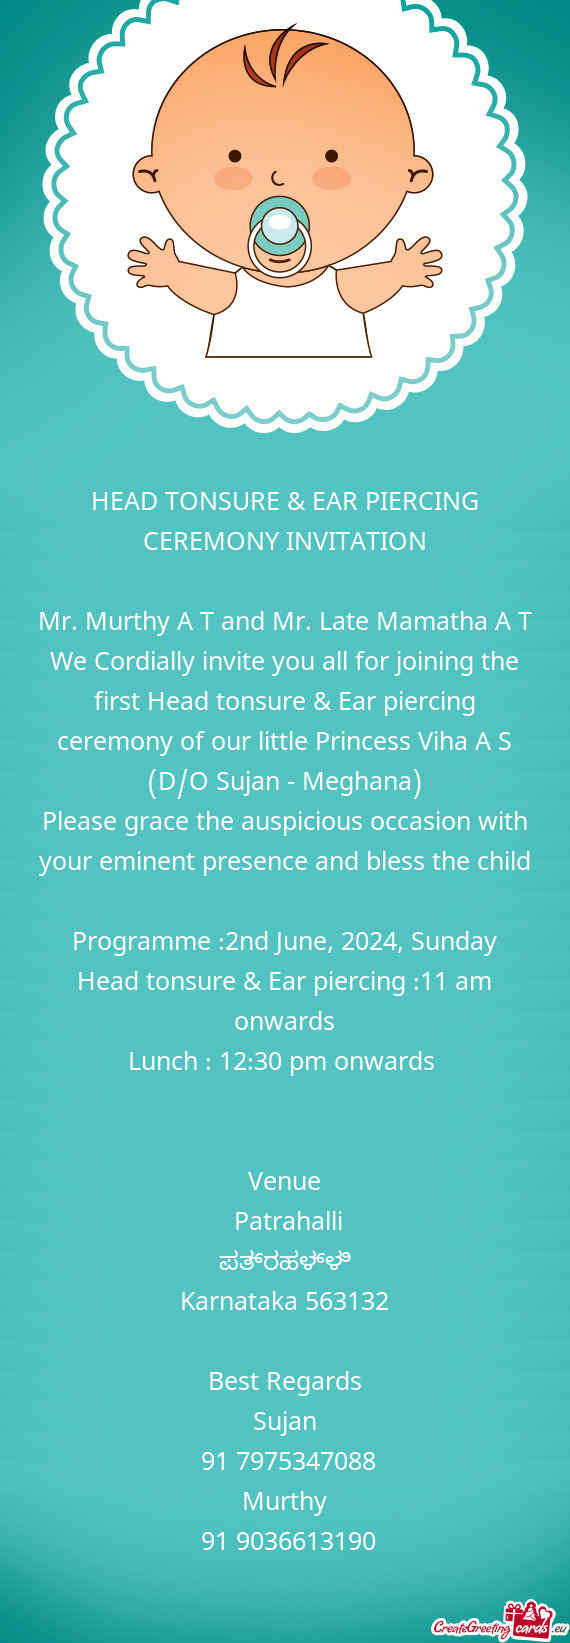 Mr. Murthy A T and Mr. Late Mamatha A T We Cordially invite you all for joining the first Head tonsu